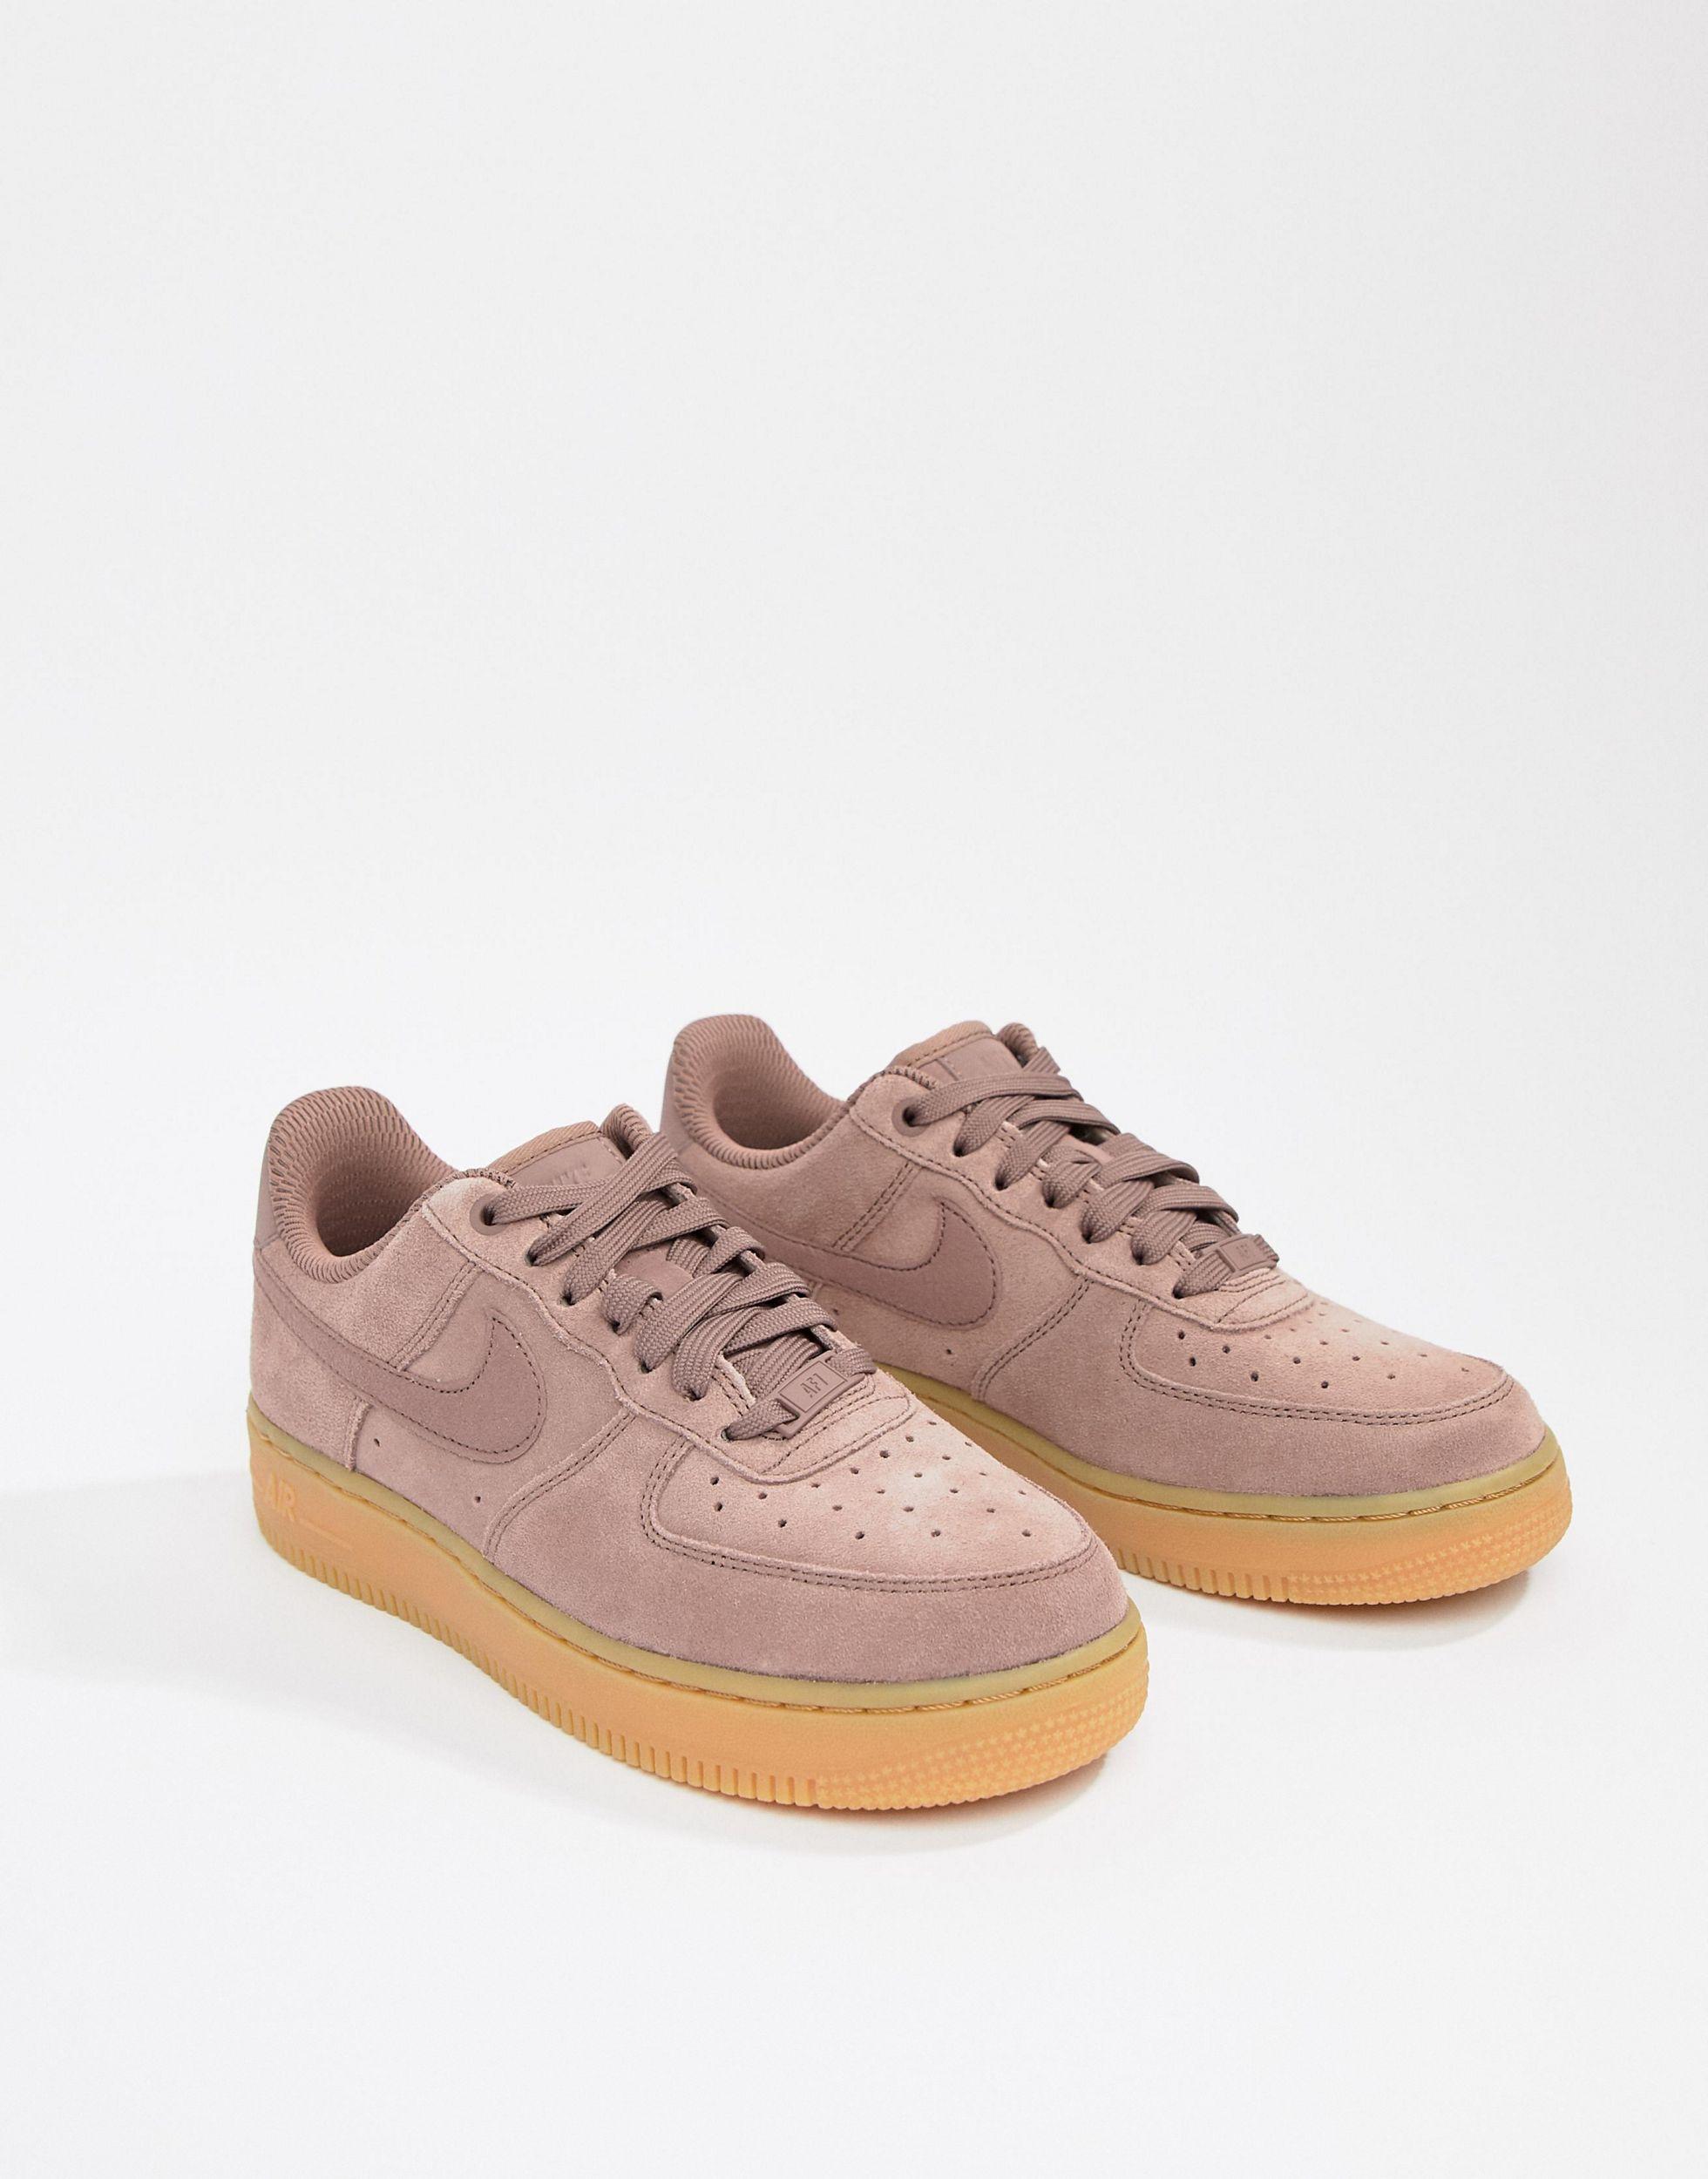 Nike Leather Mauve Air Force 1 Trainers With Gum Sole in Purple | Lyst